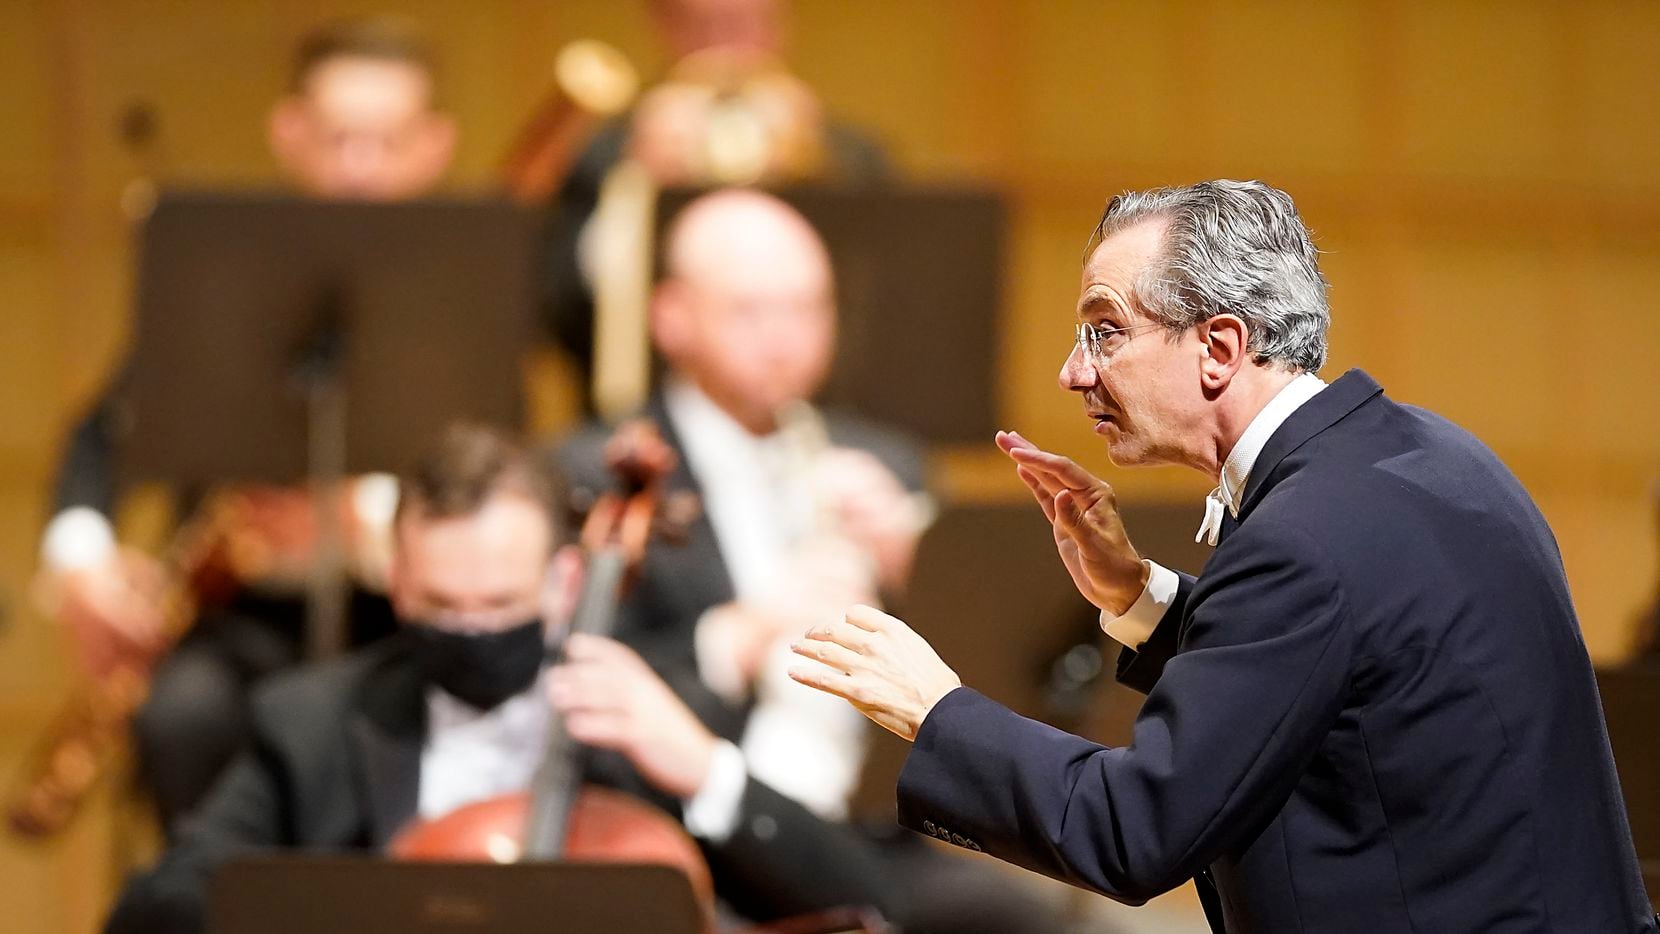 Music director Fabio Luisi conducts during the season-opening Dallas Symphony concert at the Meyerson Symphony Center on Thursday, Sept. 10, 2020, in Dallas.